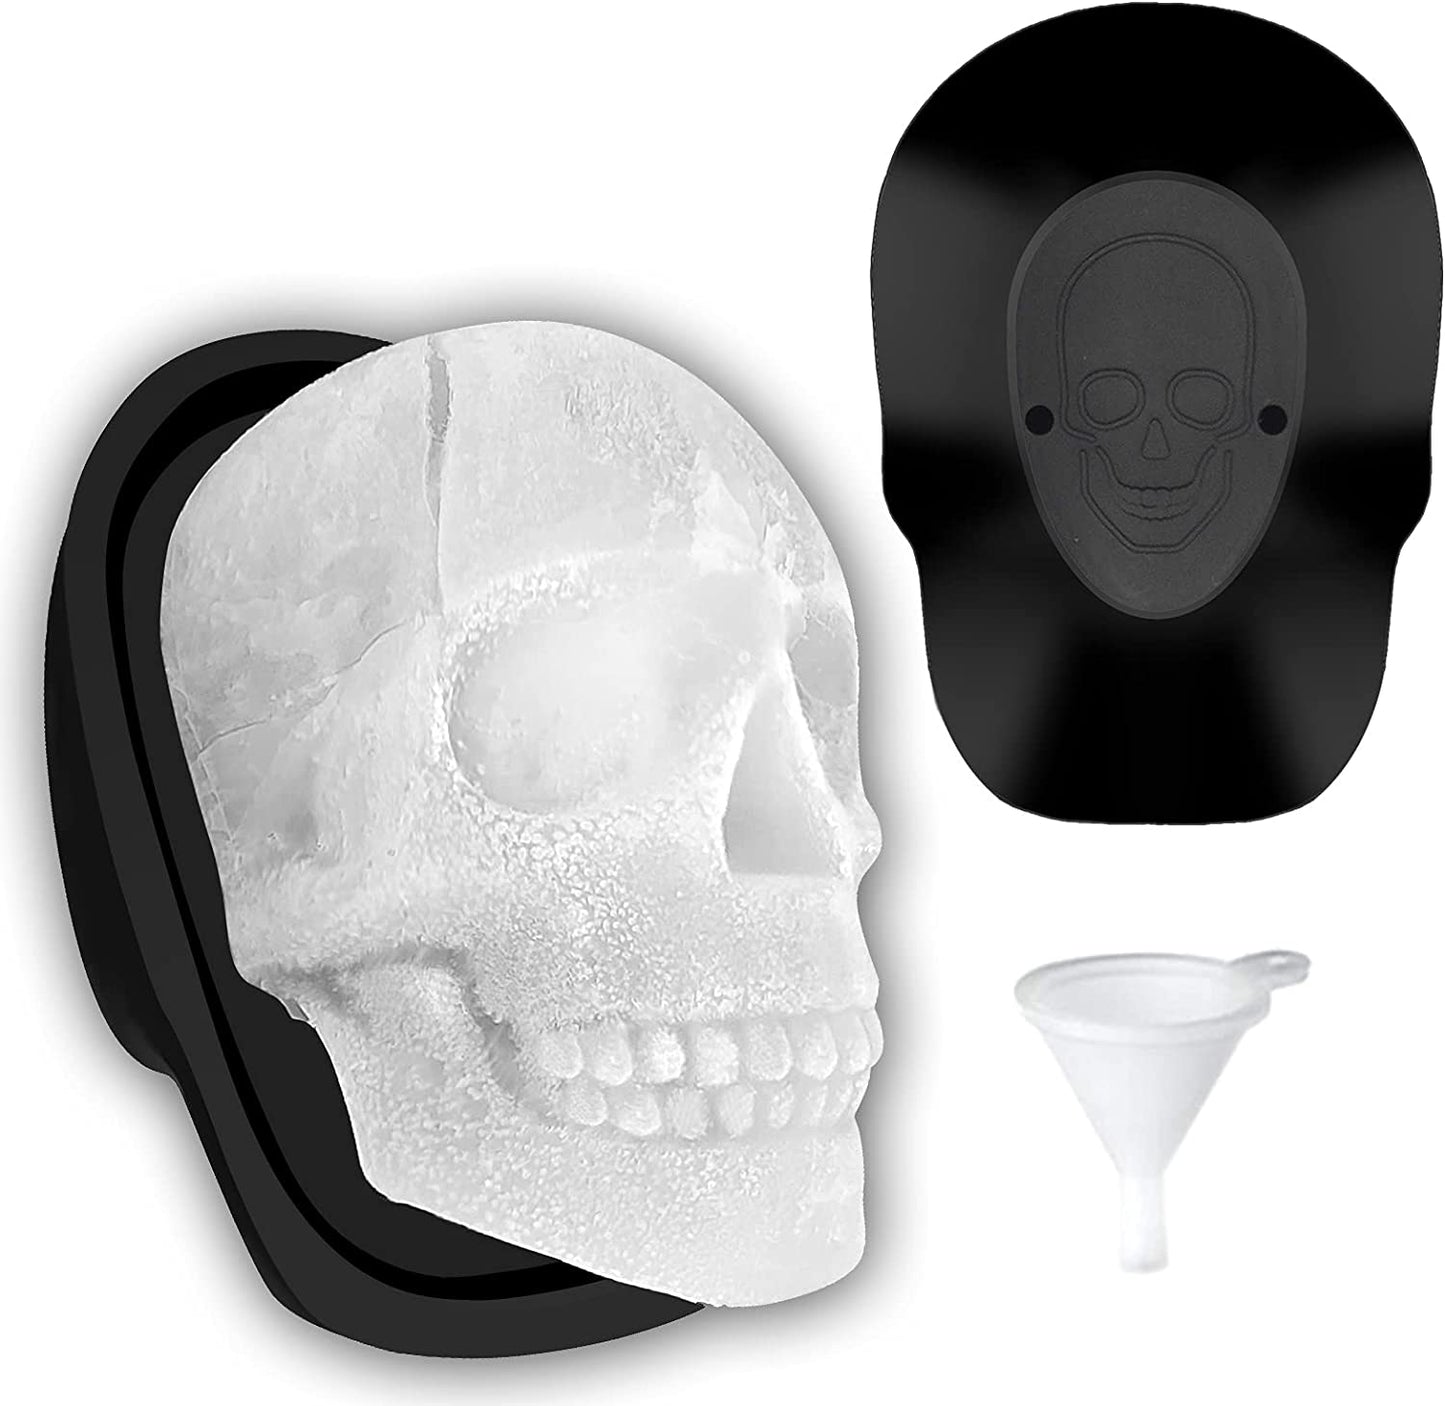 Extra Large 3D Skull Ice Cube Mold Silicone Ice Molds for Whiskey Skull Ice Cube Trays with Funnel for Big Mouth Cup Skull Ice Maker with Resin Chocolate Sugar Whiskey Ice Mold for Parties